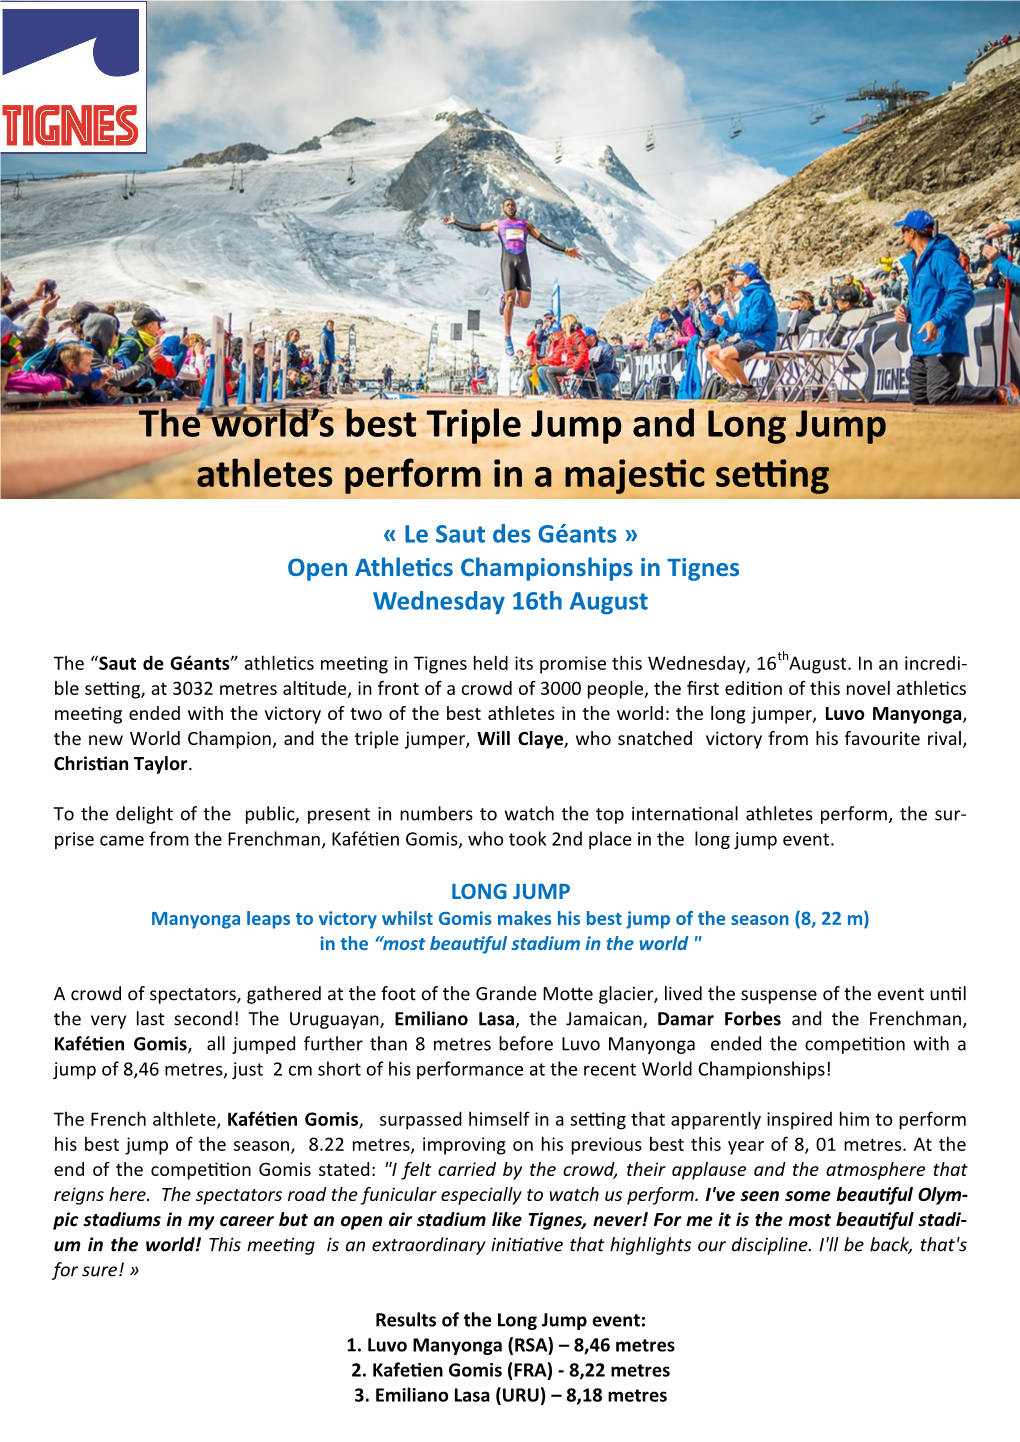 The World's Best Triple Jump and Long Jump Athletes Perform in A